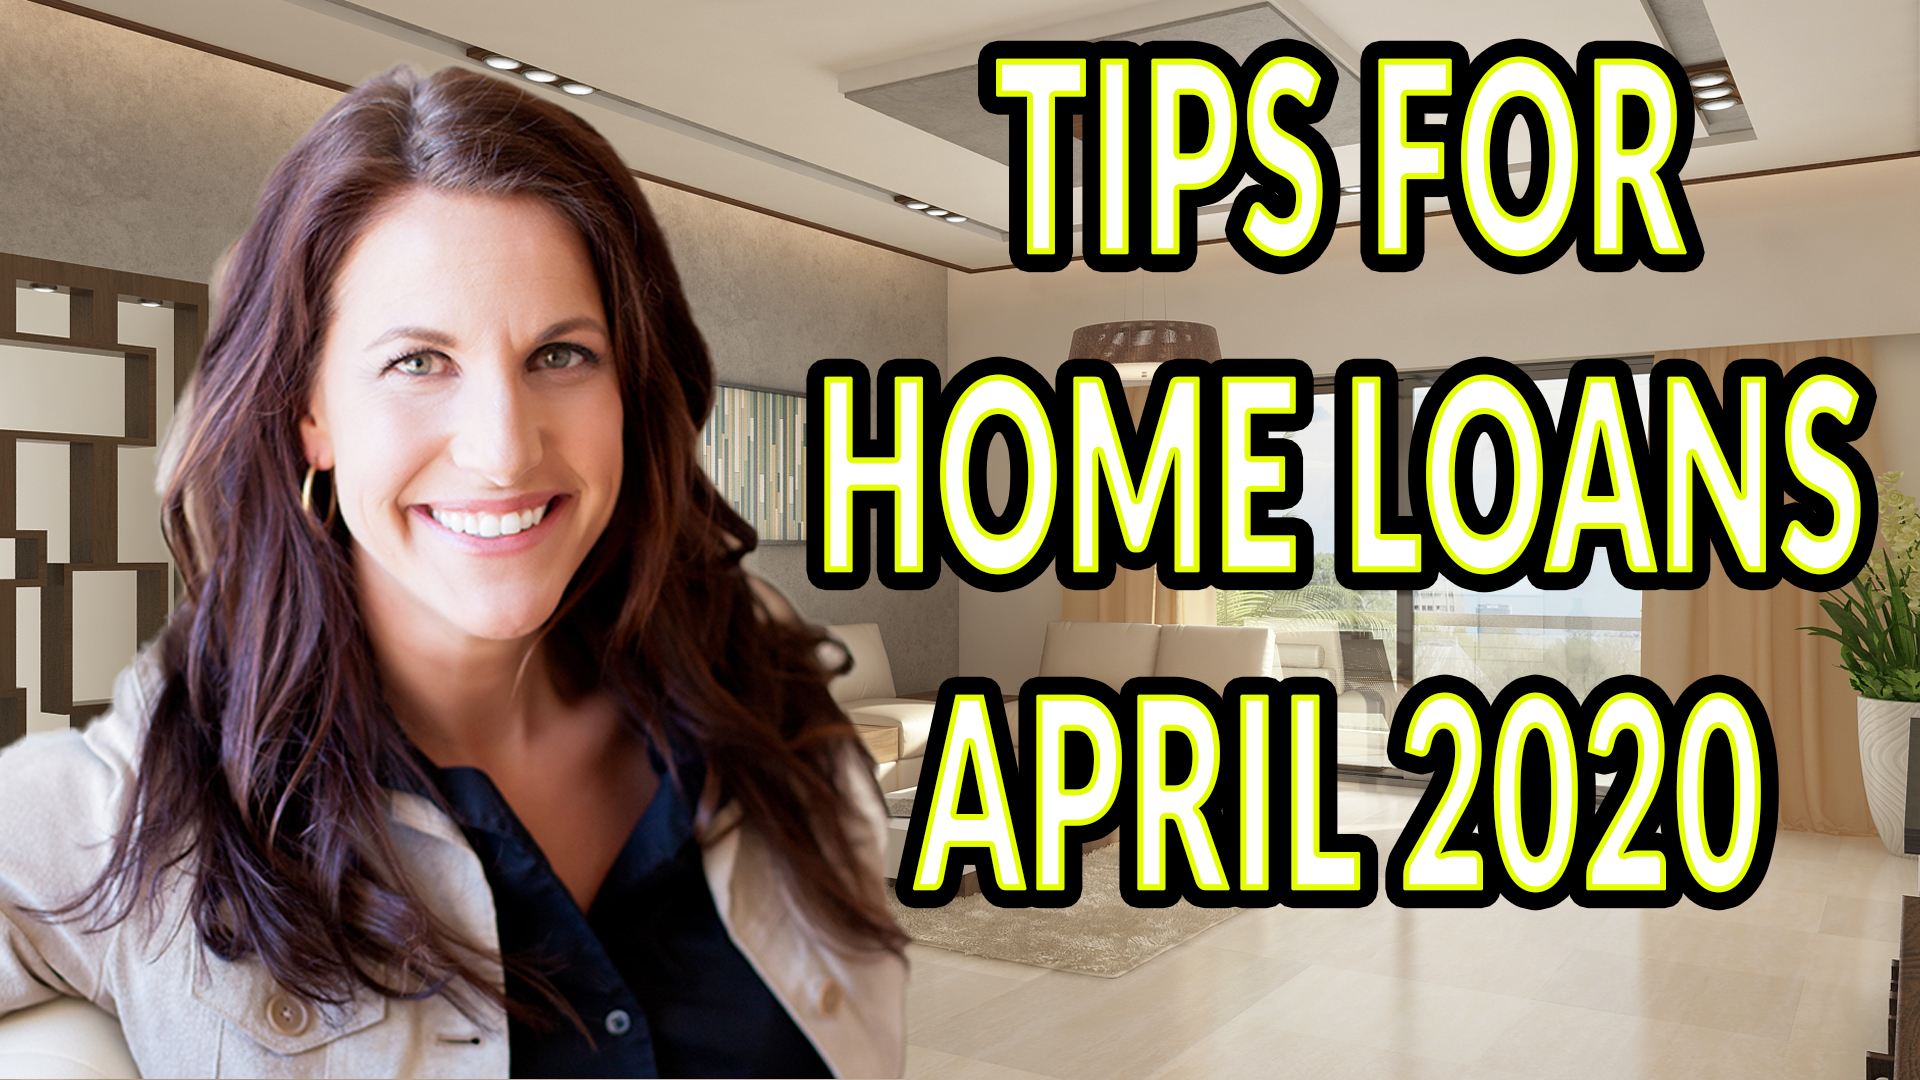 You are currently viewing A Mortgage Expert’s Tips for Home Loans